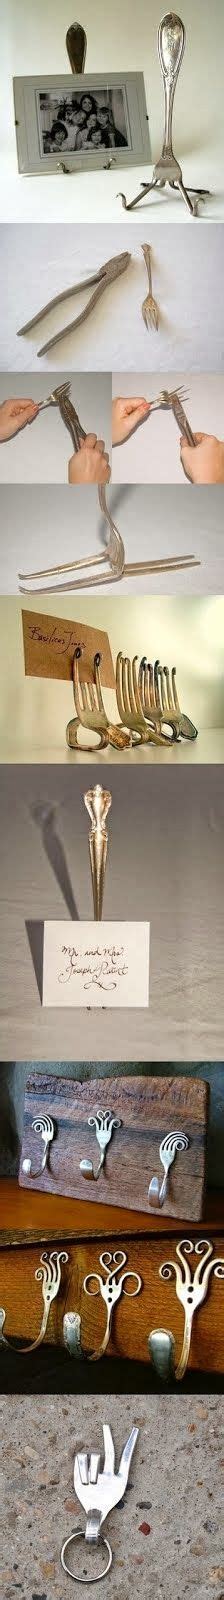 You Could Do So Much With Forks Crafts Do It Yourself Crafts Diy Crafts